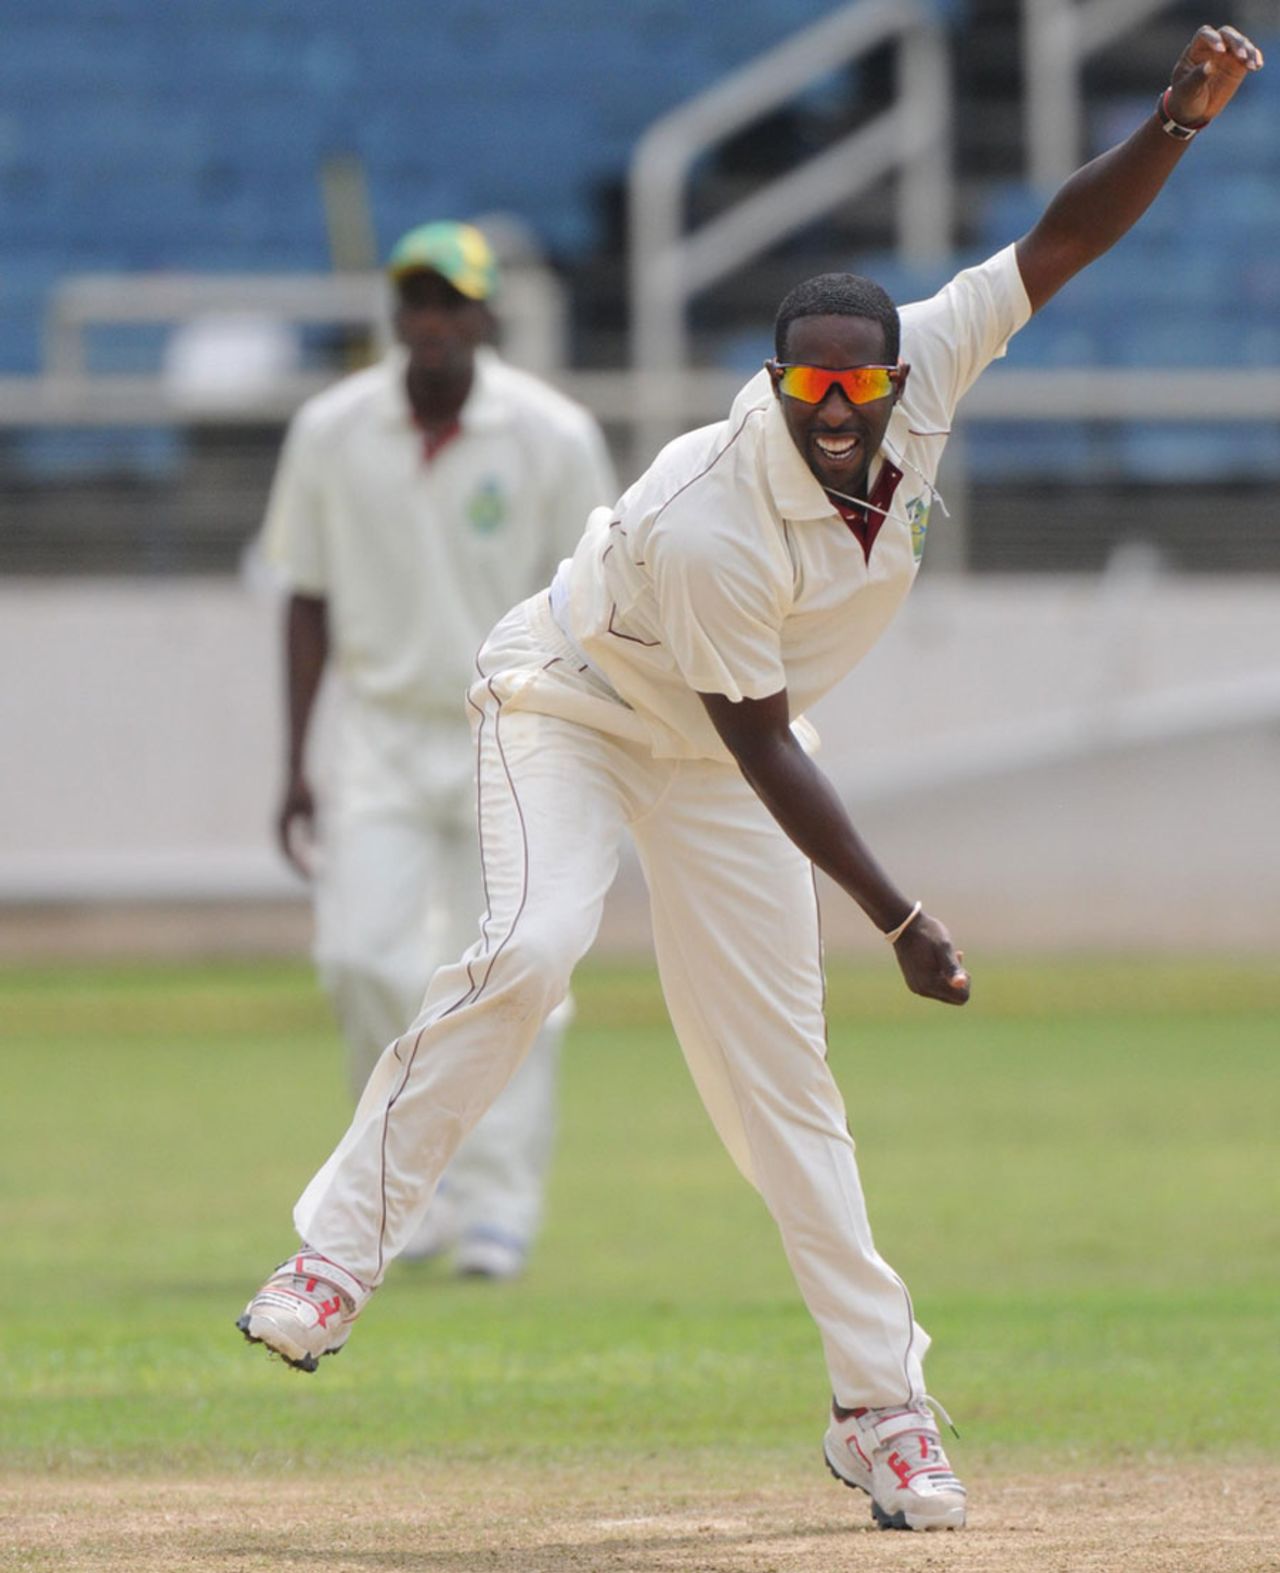 Shane Shillingford in his delivery stride, Jamaica v Windward Islands, Day 1, Kingston, Regional Four Day competition, February 3, 2012